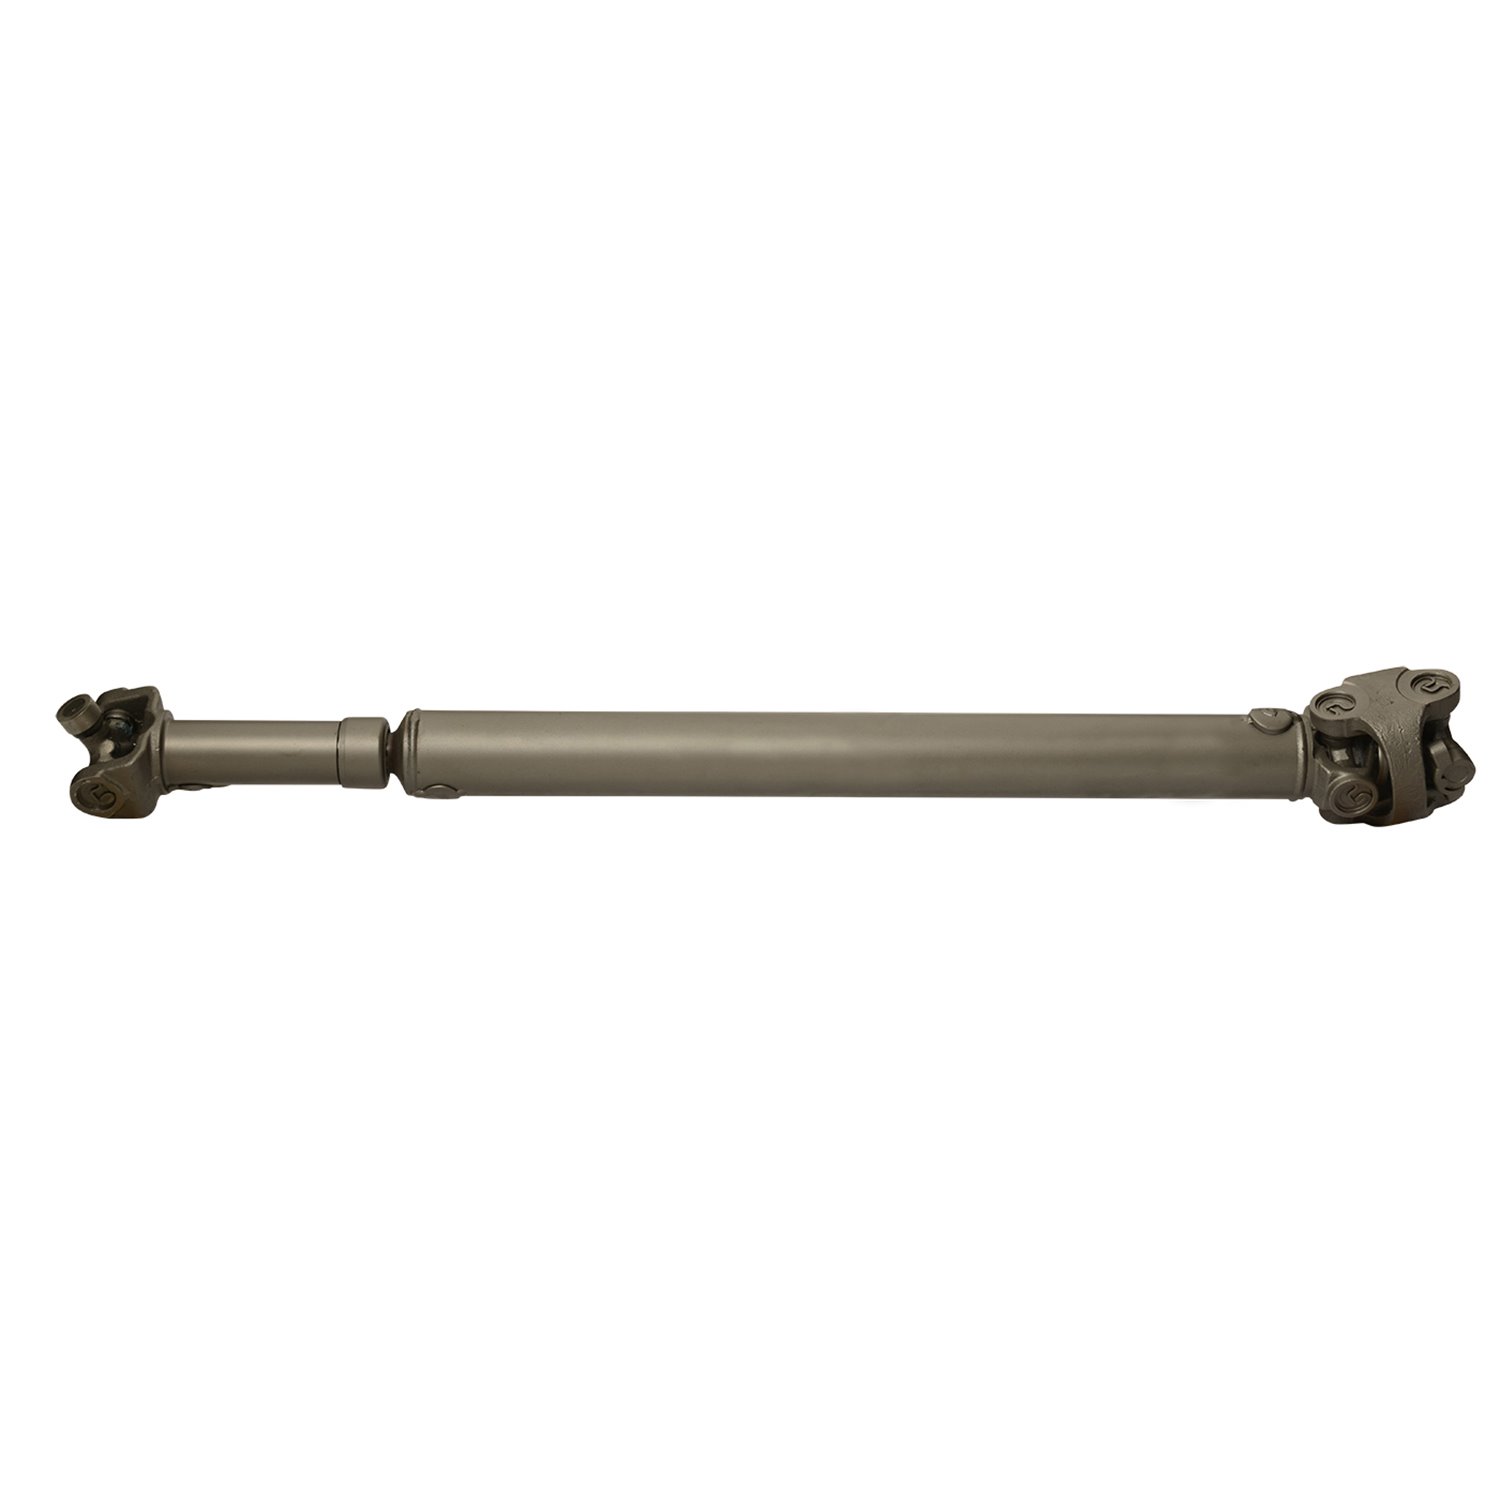 USA Standard ZDS9148 Front Driveshaft, For F250, 25-1/8 in. Center-To-Center